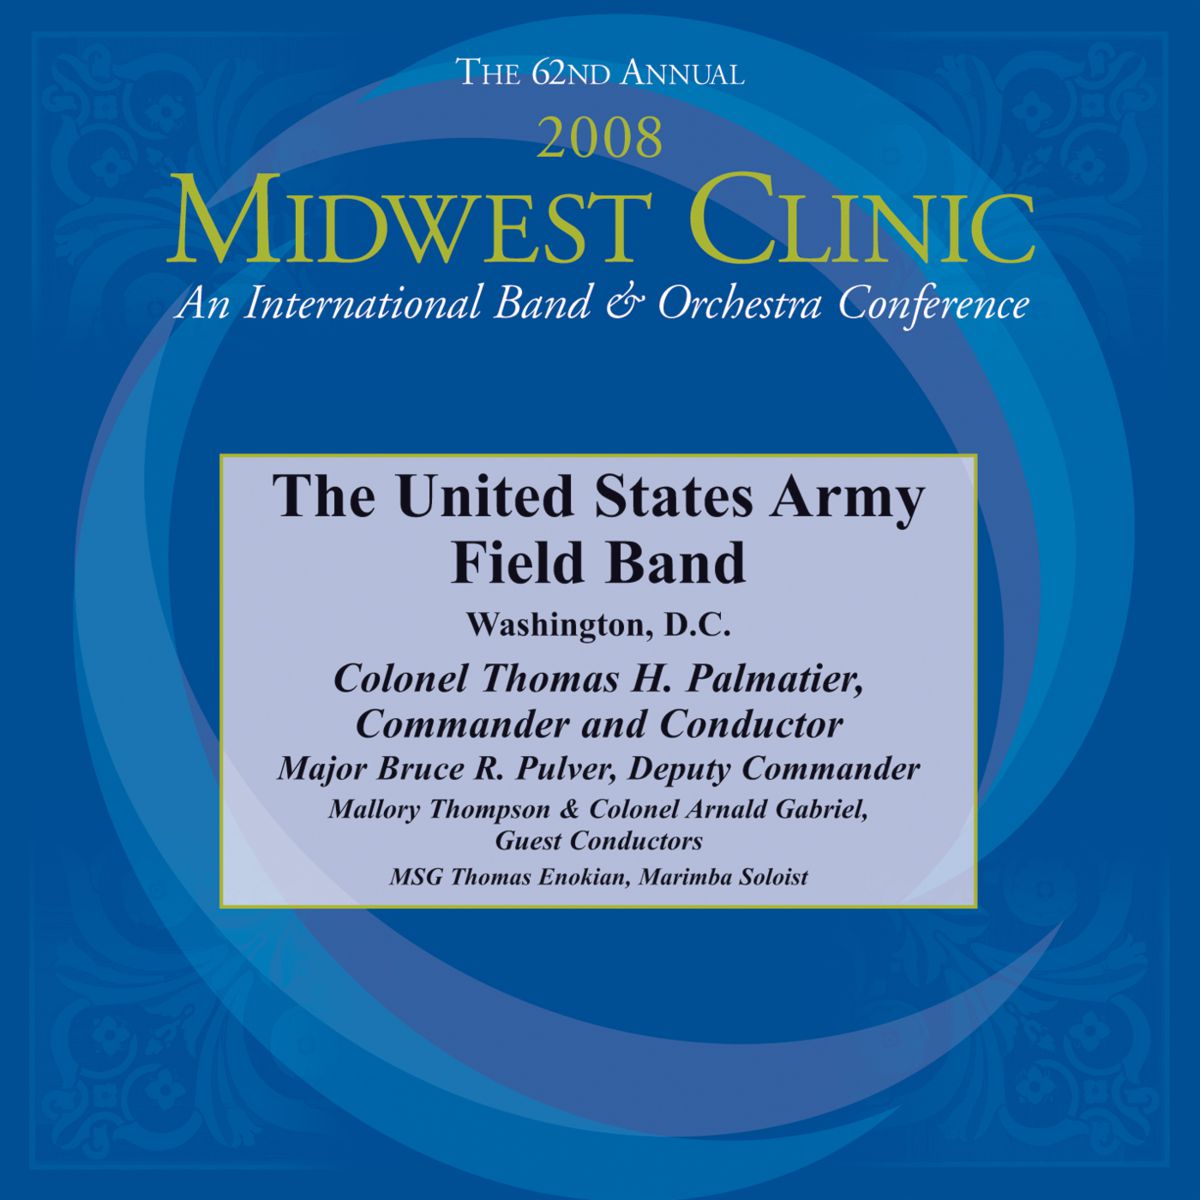 2008 Midwest Clinic: The United States Army Field Band - click here